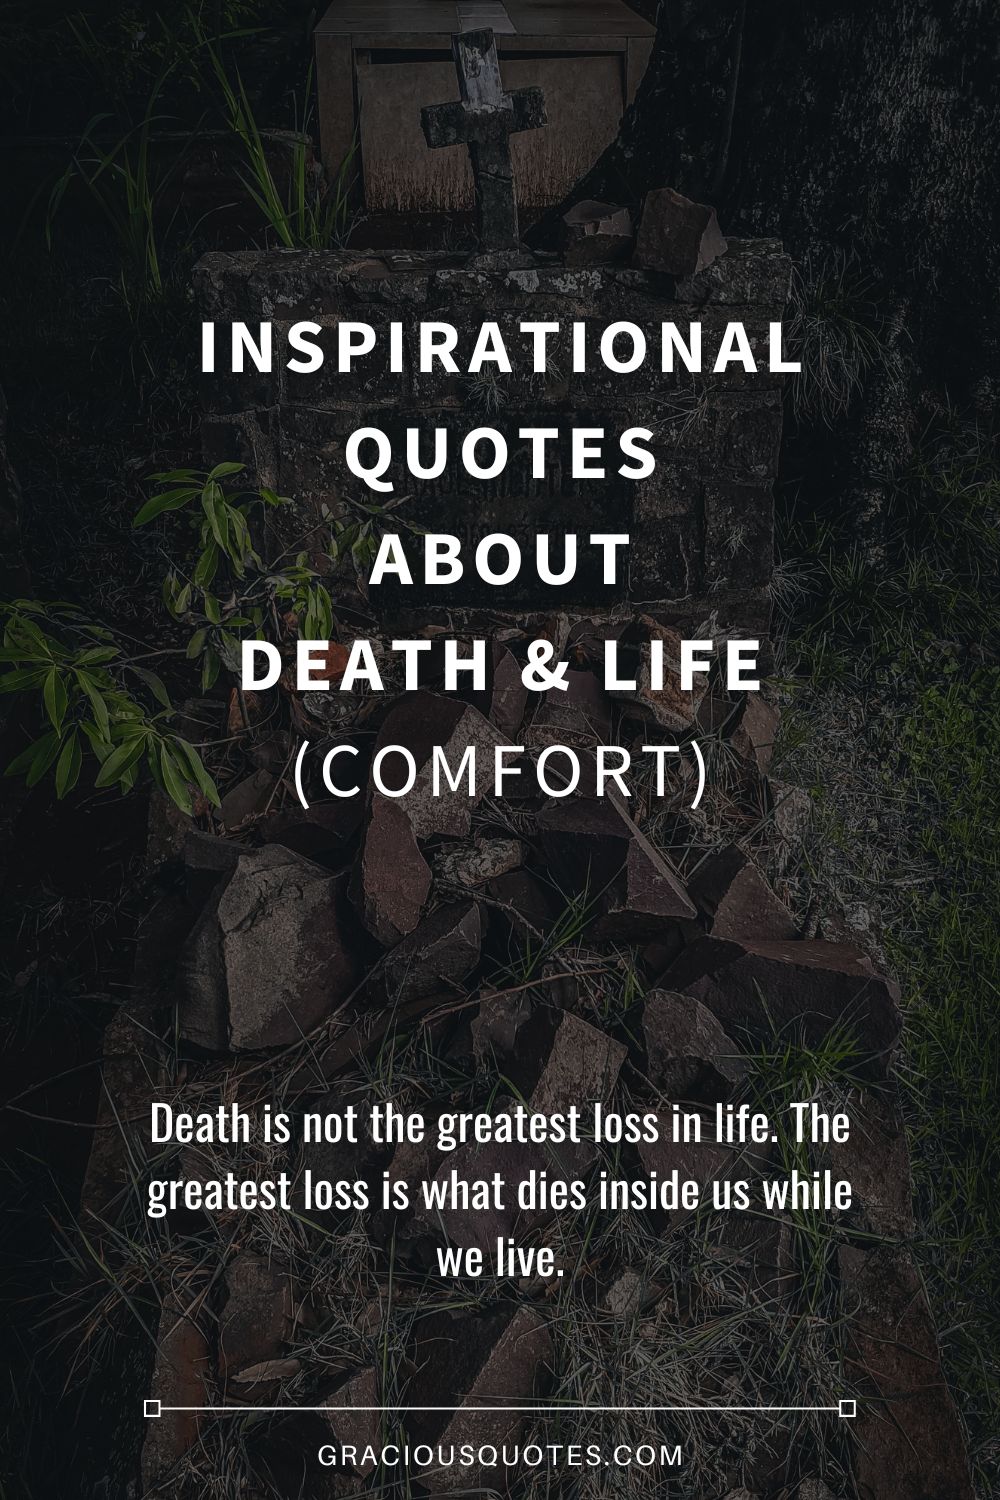 Inspirational Quotes About Death & Life (COMFORT) - Gracious Quotes